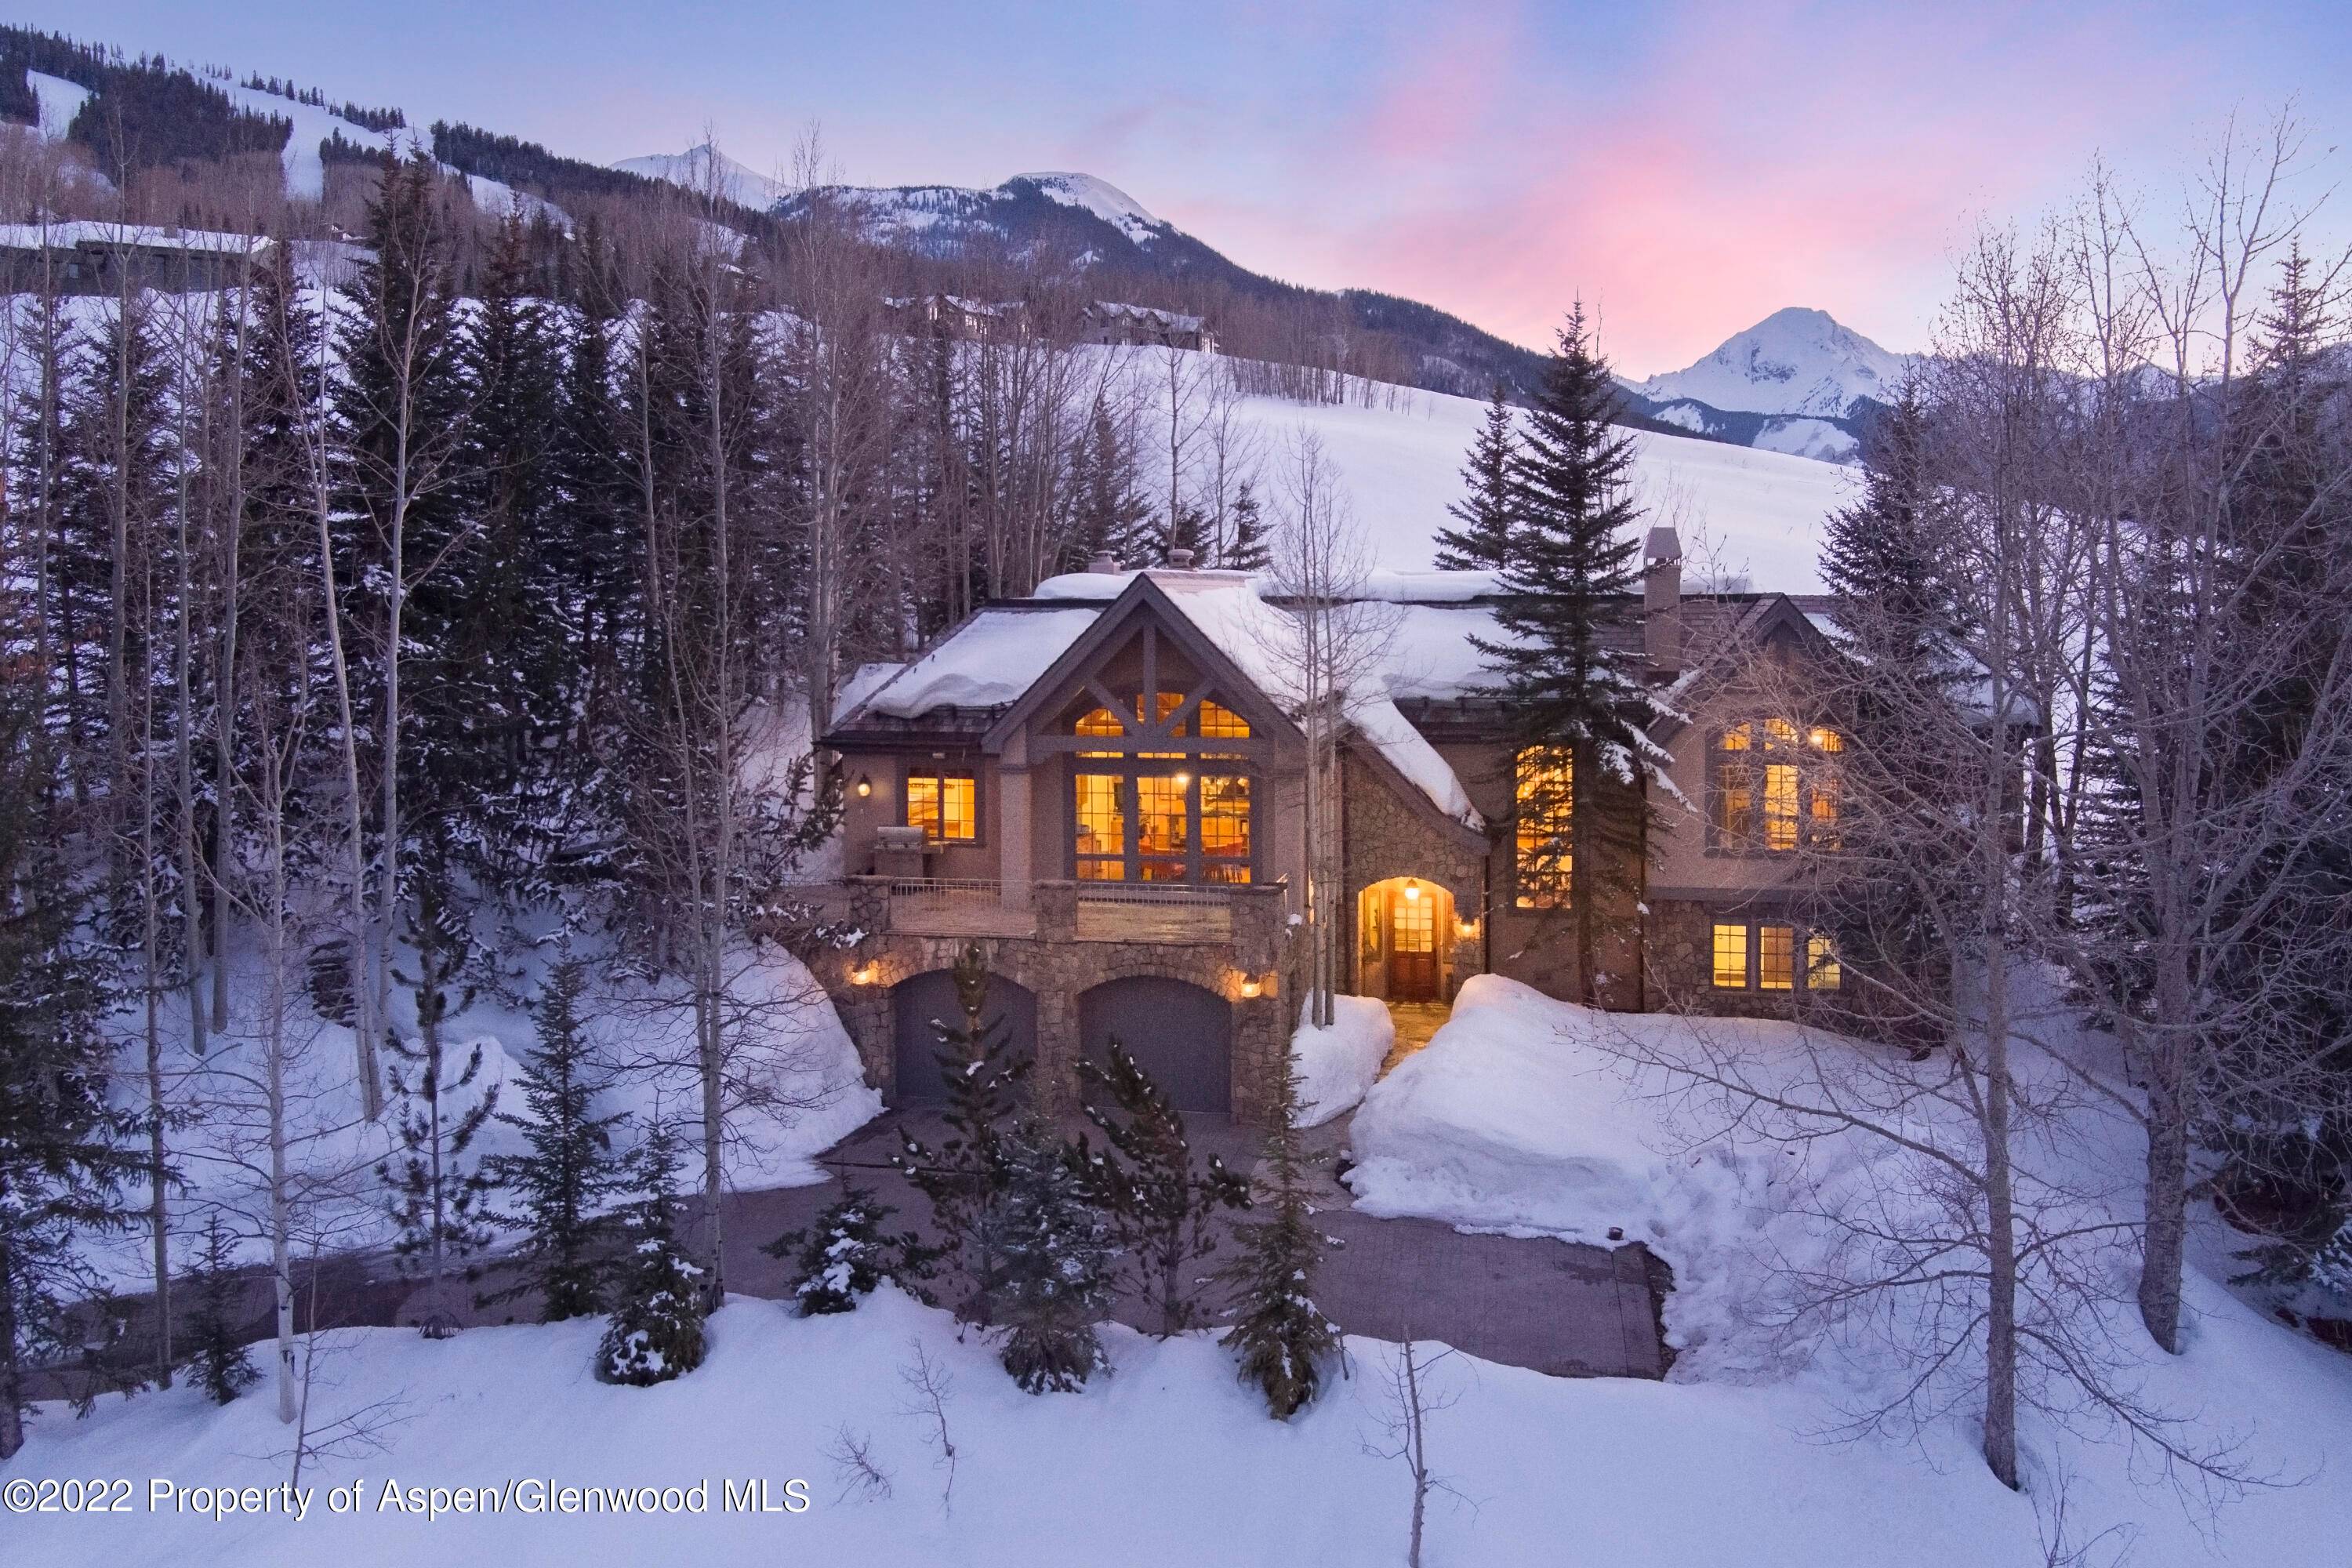 179 Divide Drive offers classic mountain estate qualities synonymous with Snowmass Village, the world class ski mountain that is just outside its doors.